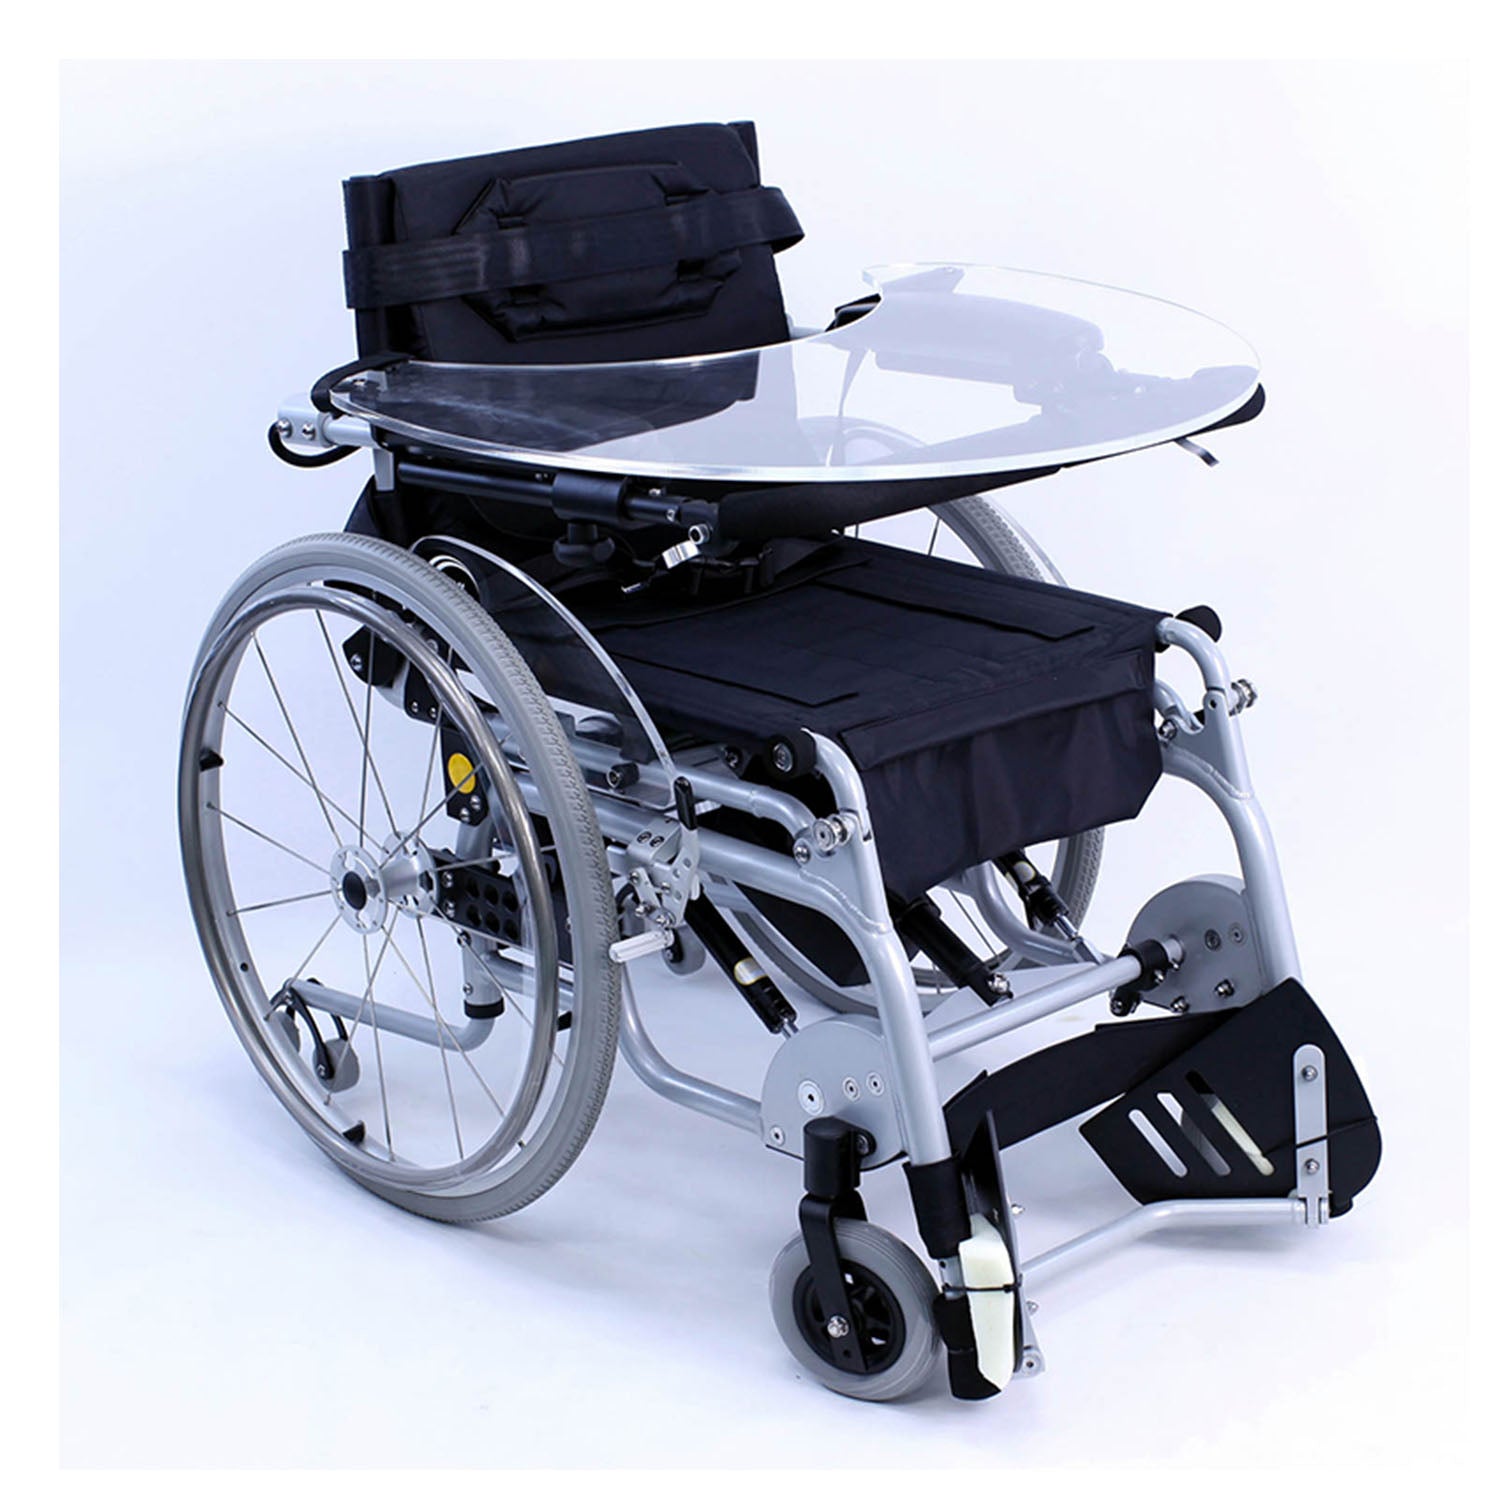 Karman XO-101 Manual Wheelchair, Push Button For Stand-Up Position, 18 inch Wide, Aluminum Frame With Multi Functional Tray